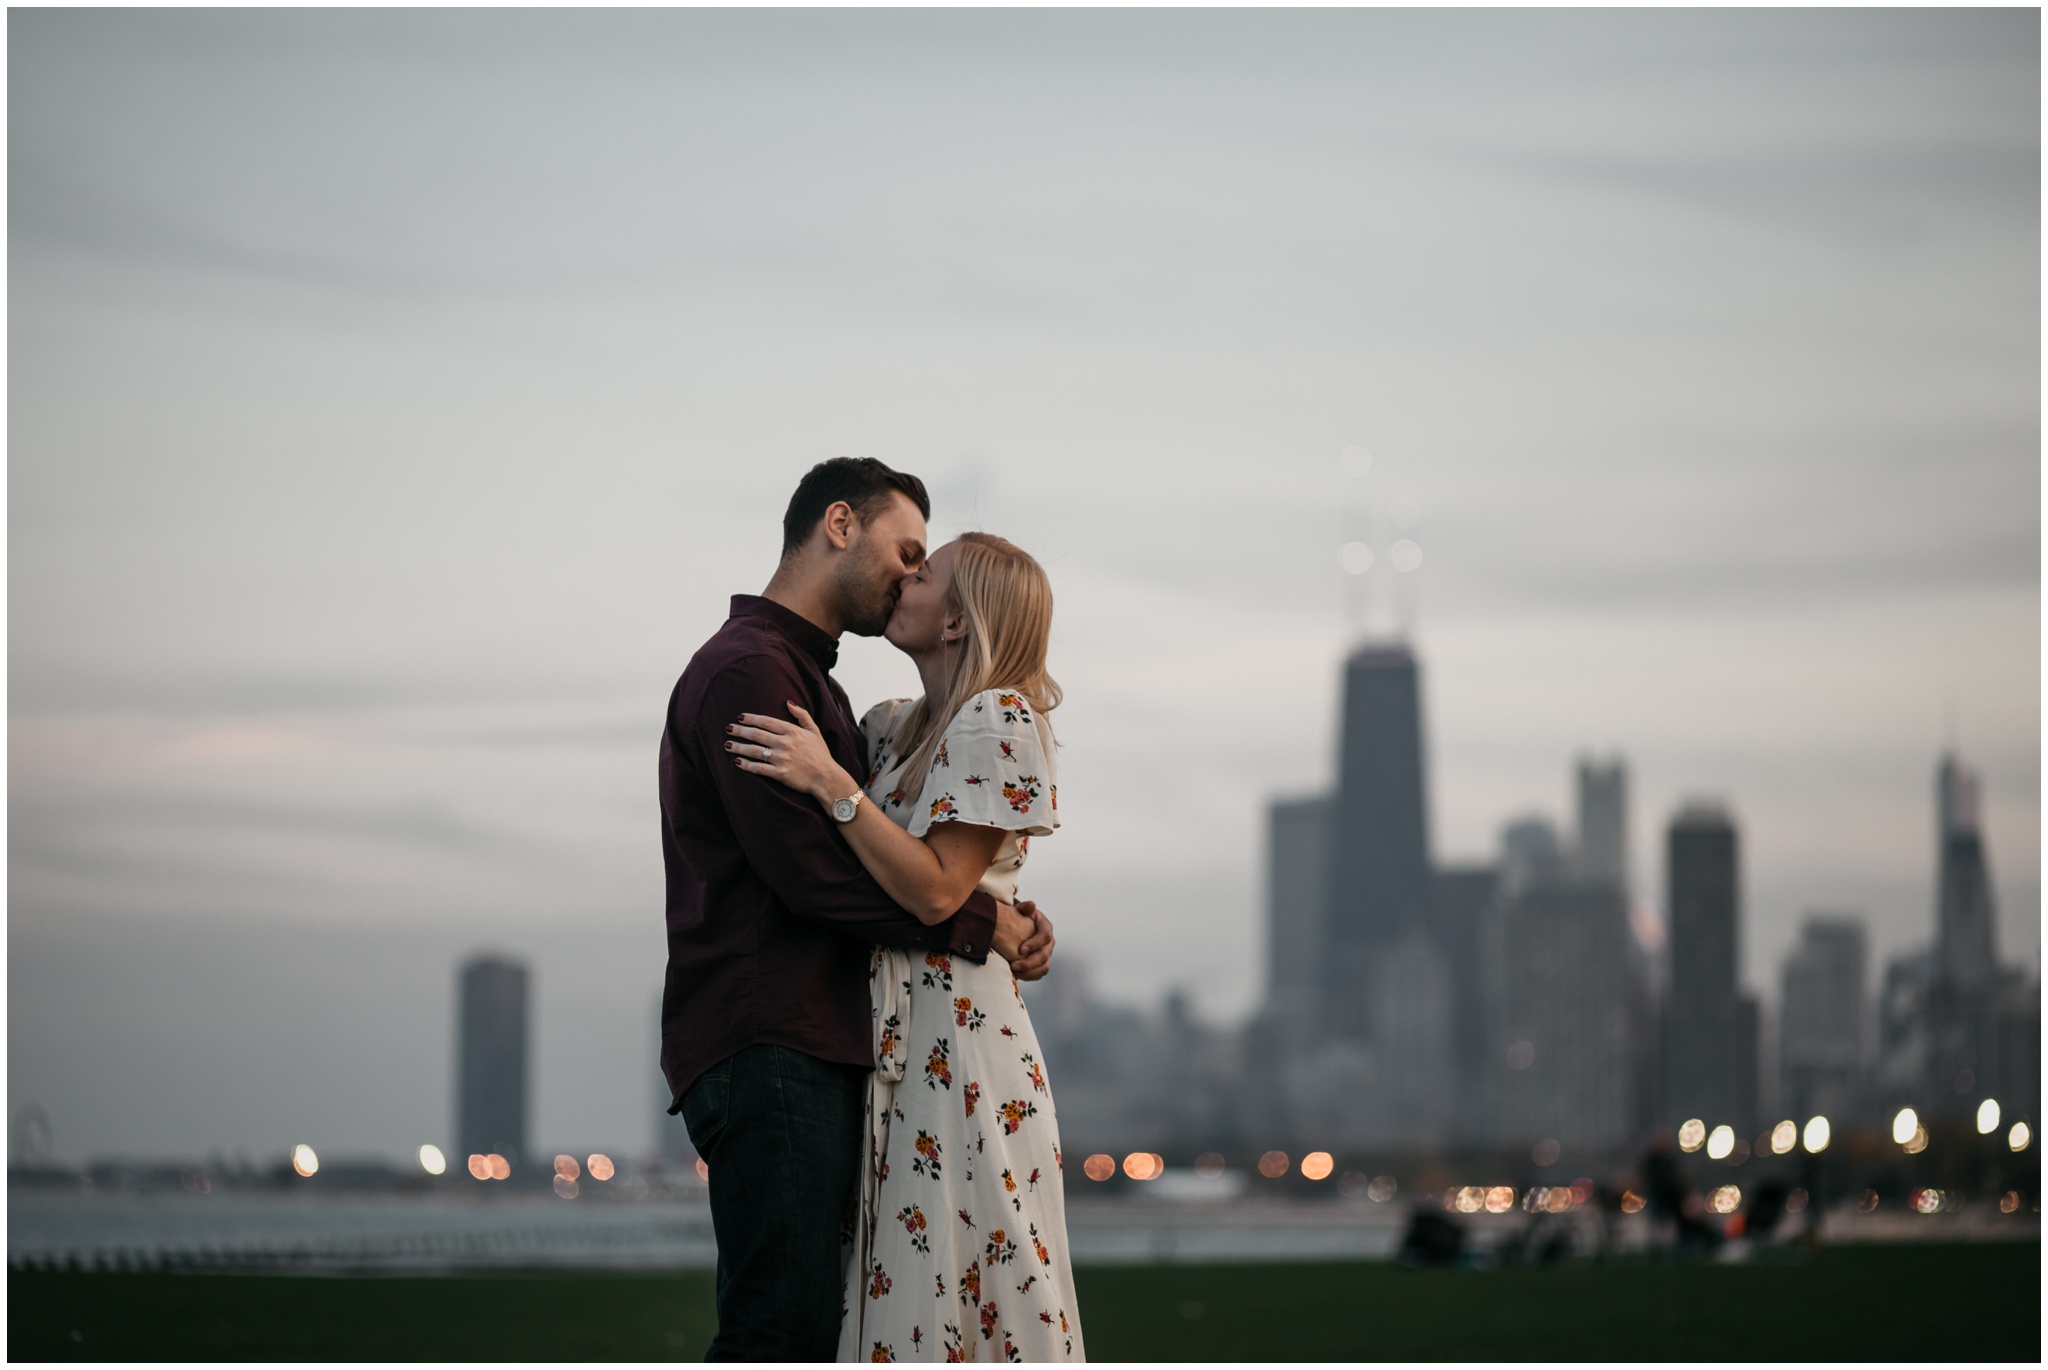 The Morros Wedding Photography Melissa and Anil Downtown Chicago Engagement Session_0483.jpg